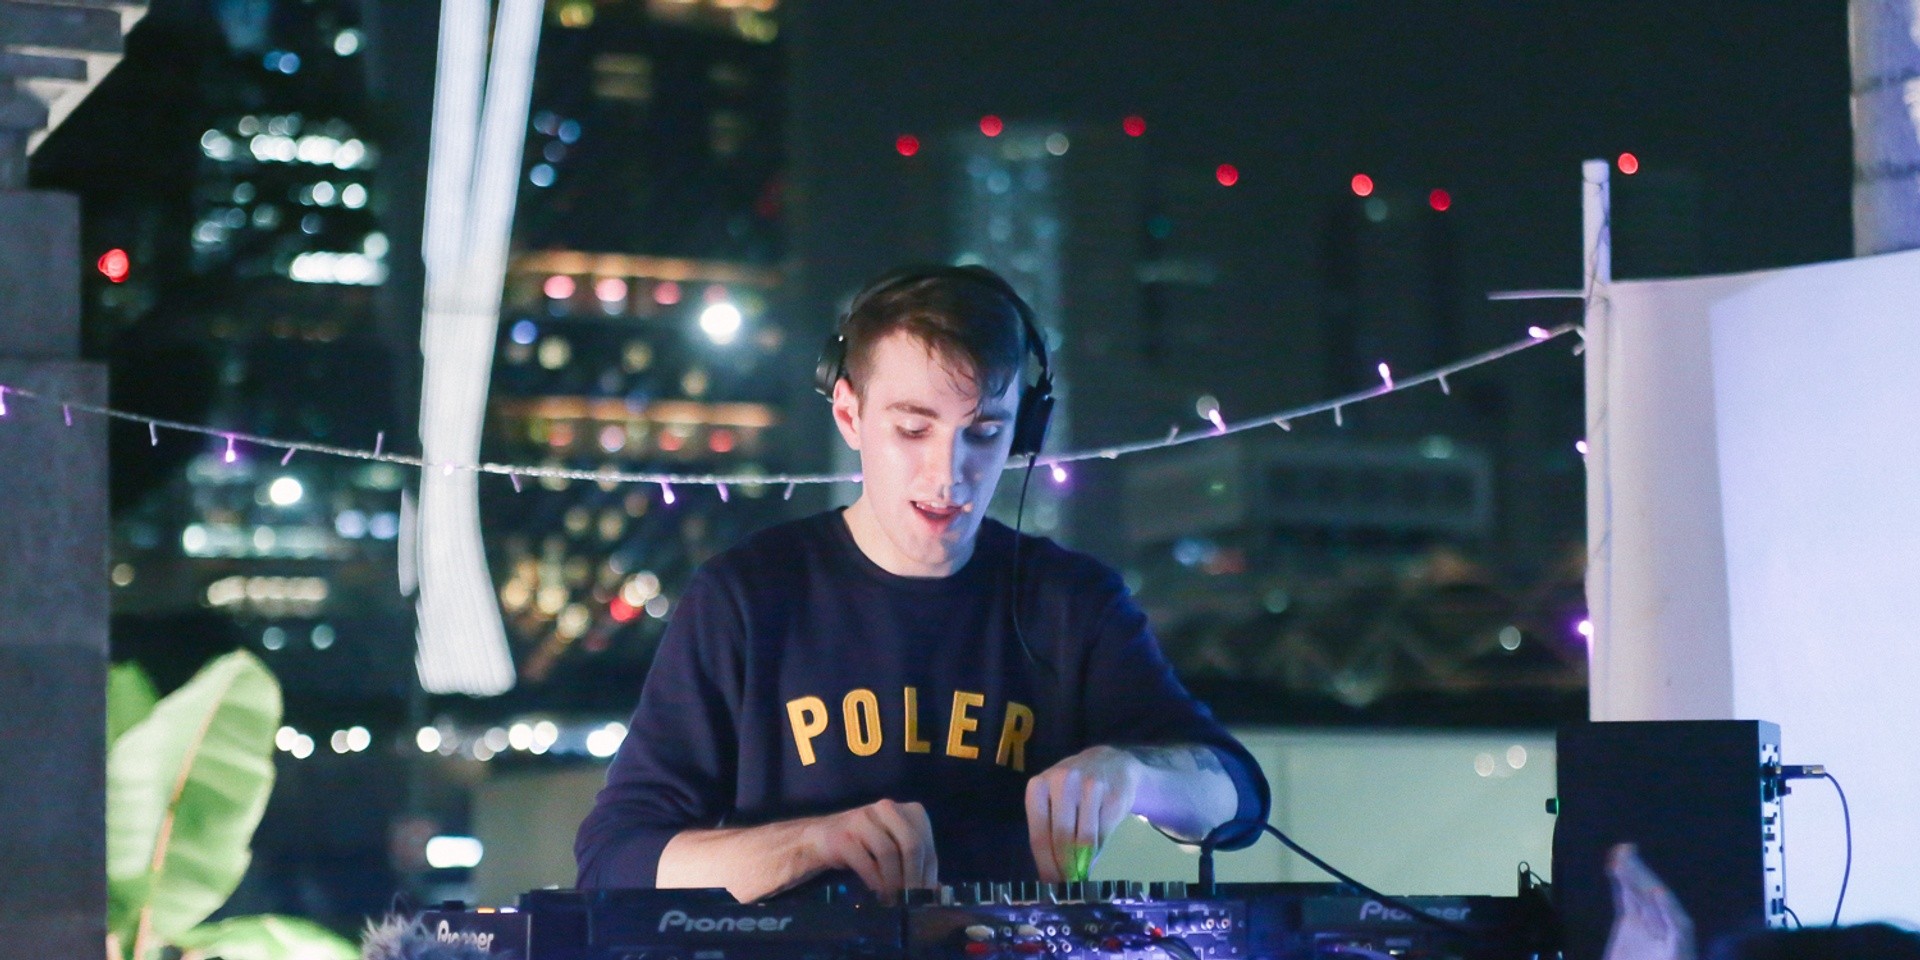 Sweating it out future funk style with Yung Bae – gig report